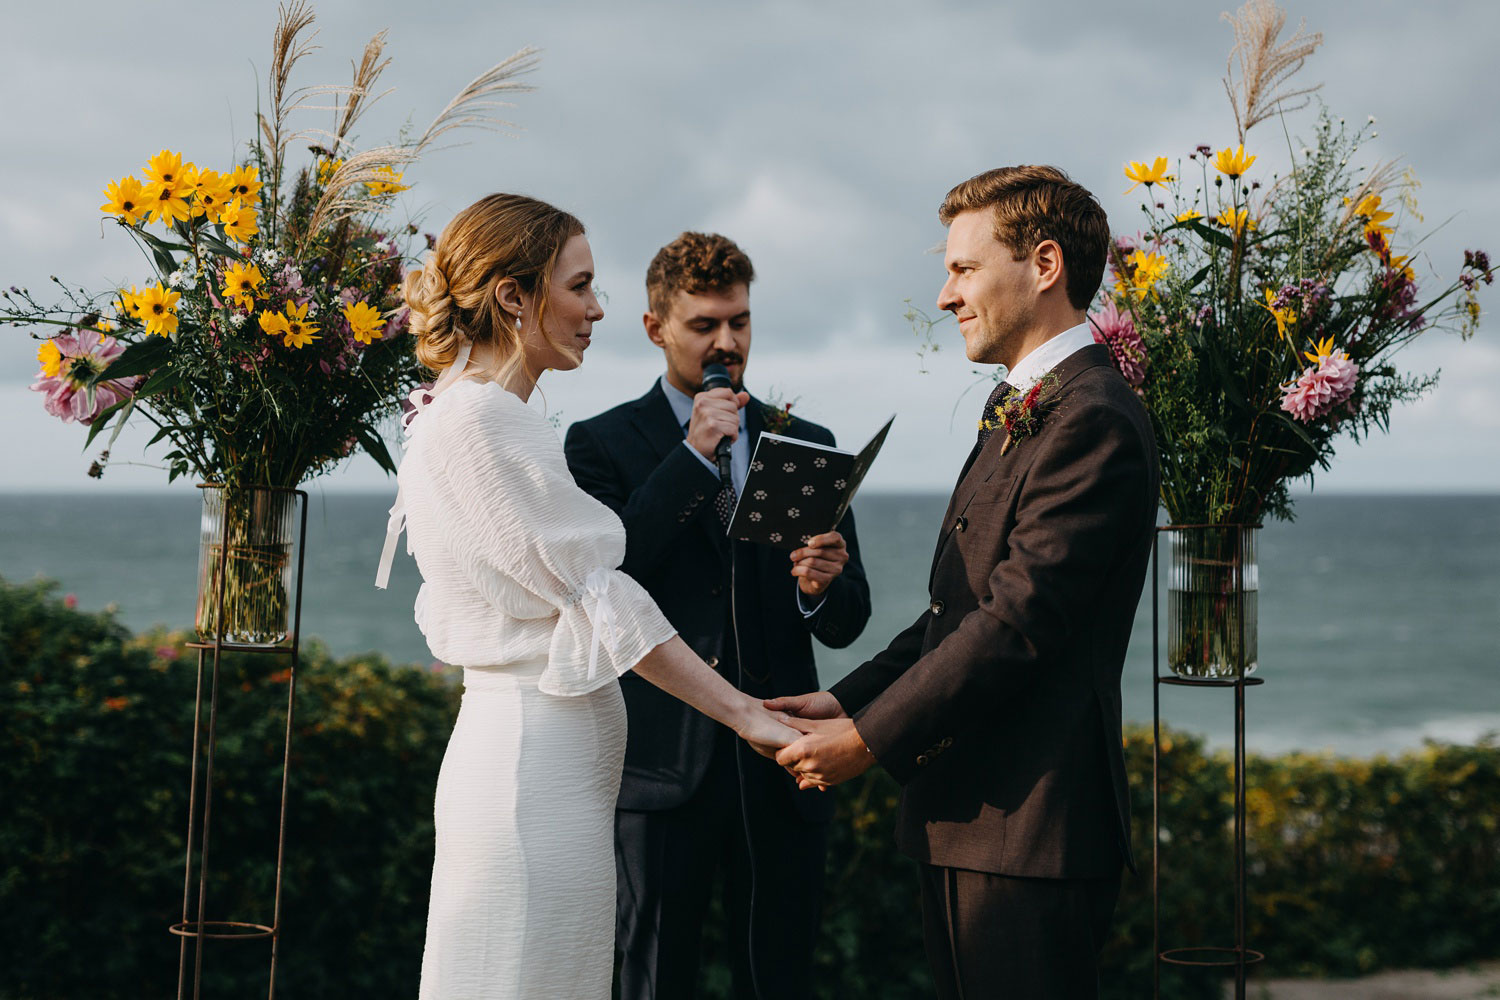 A picturesque moment: the open-air ceremony at Helenekilde Badehotel